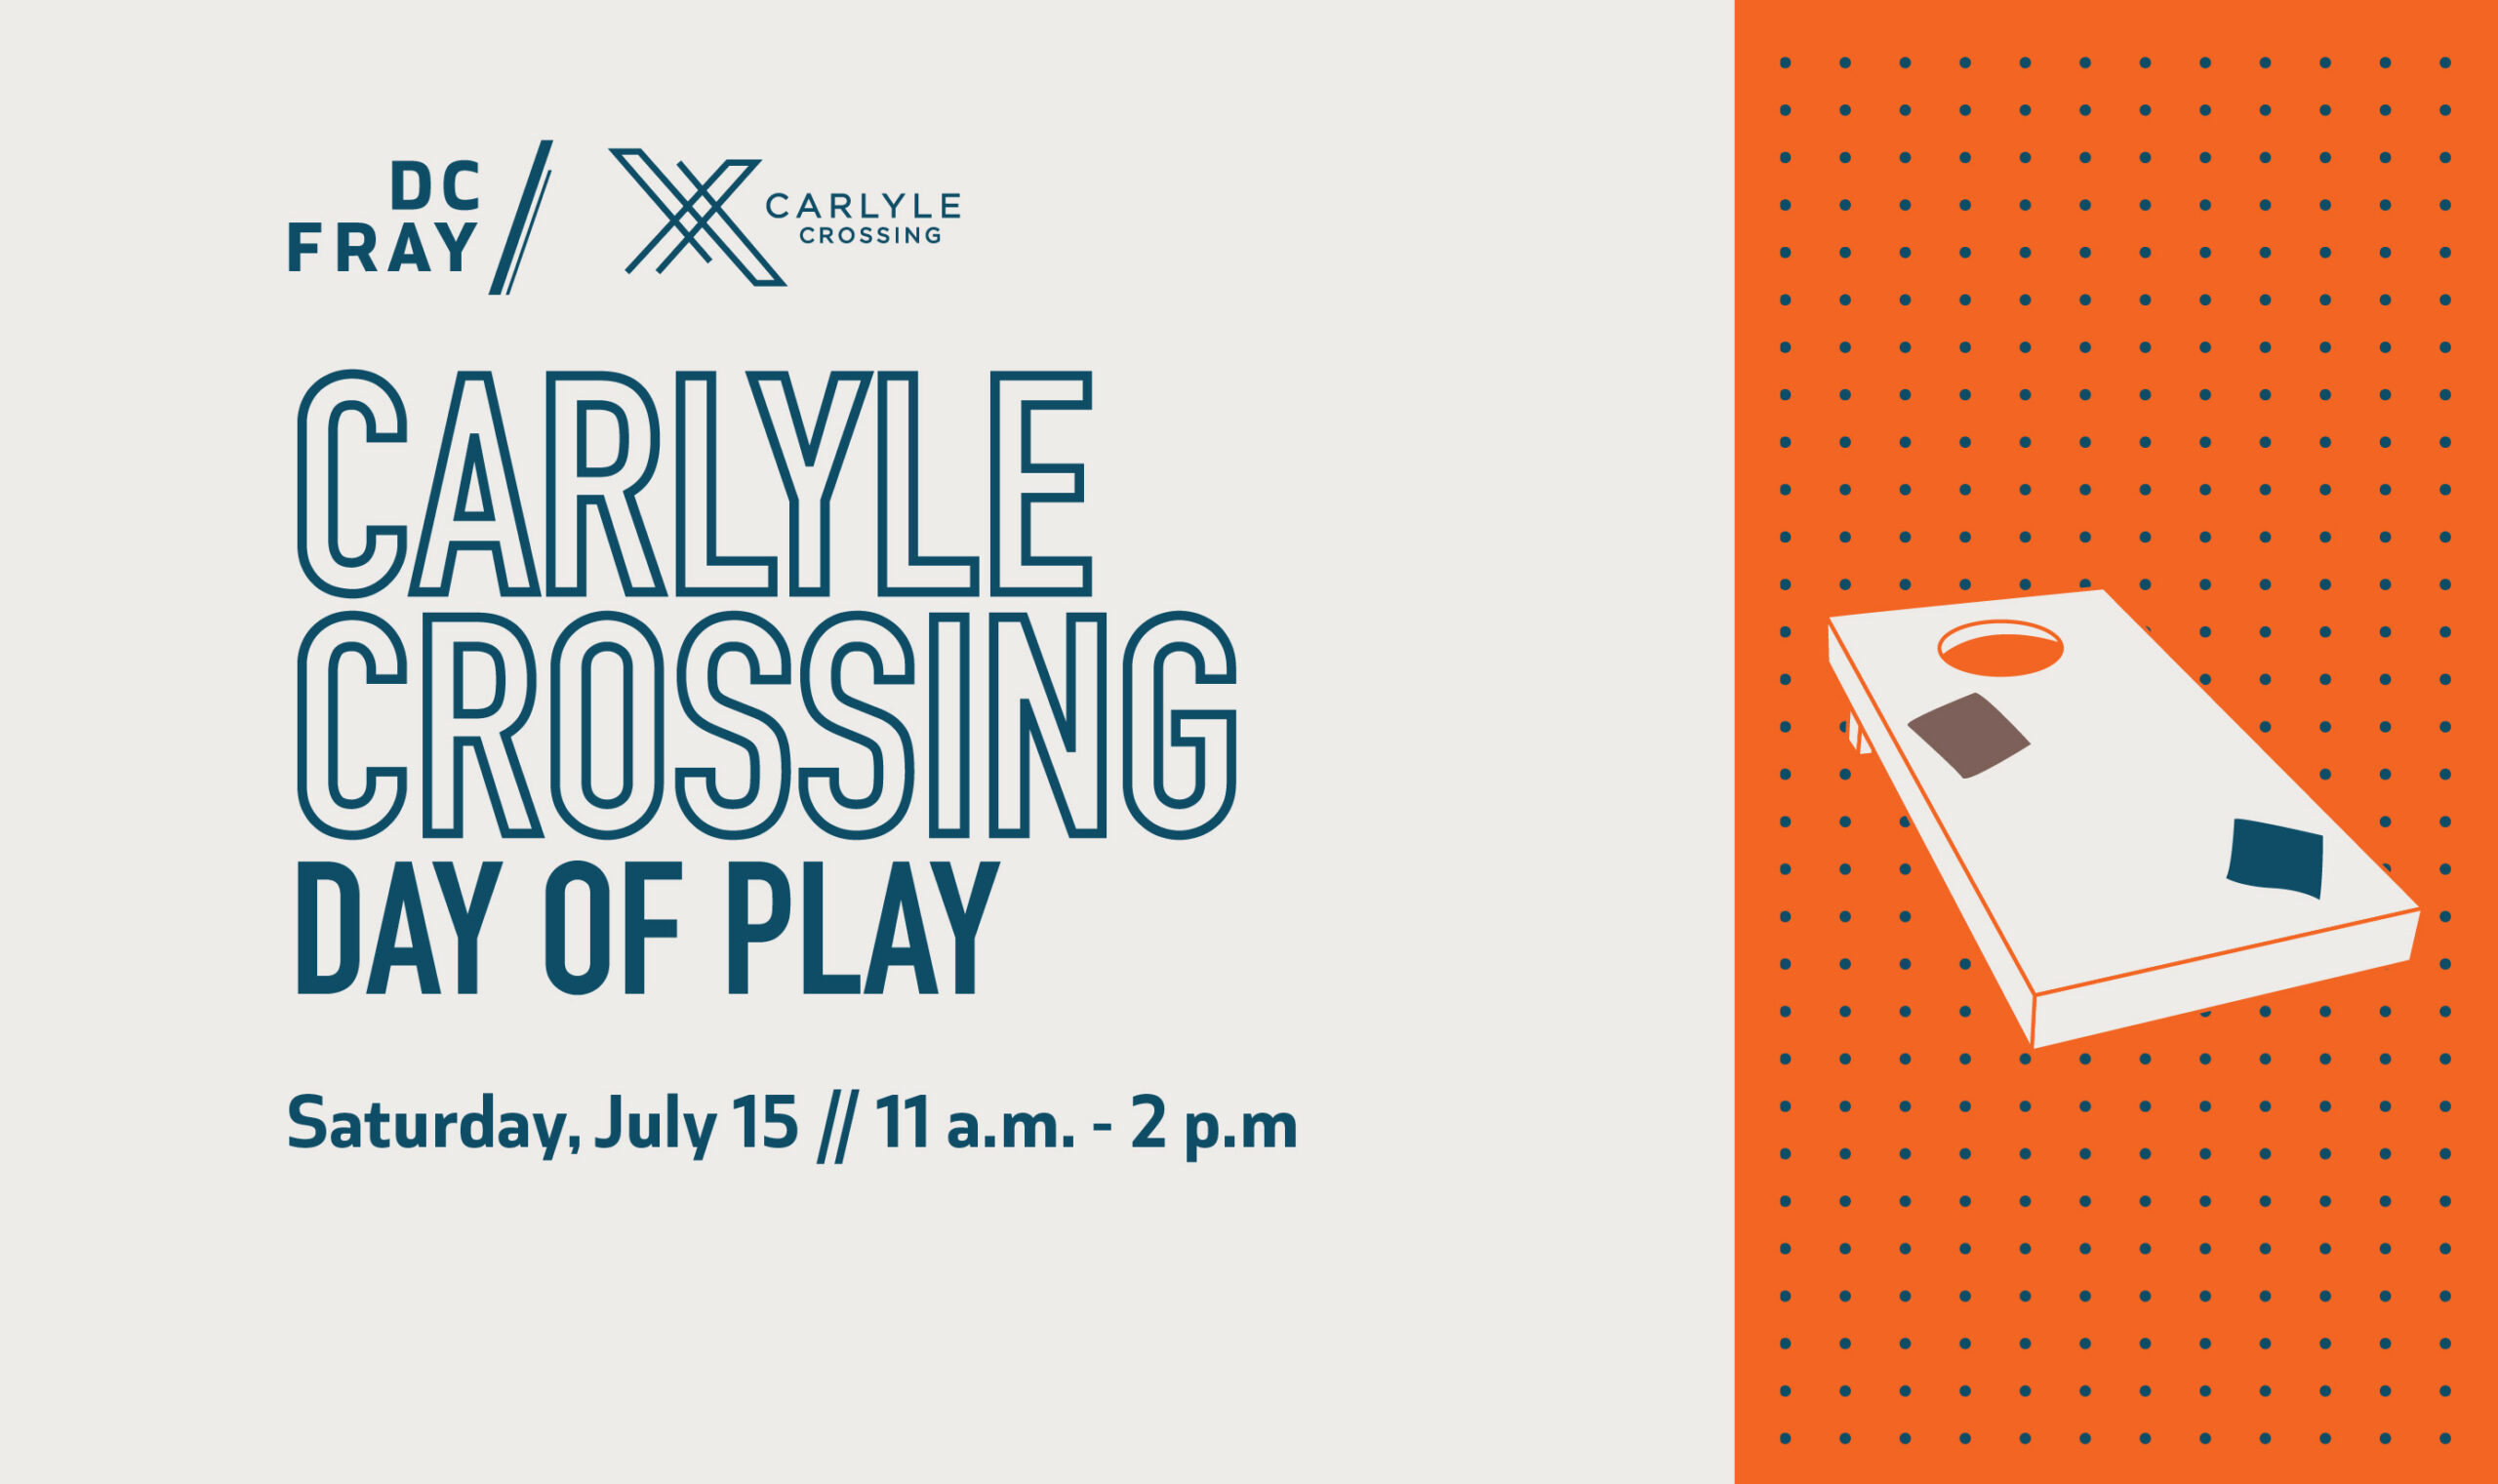 Day of Play at Carlyle Crossing